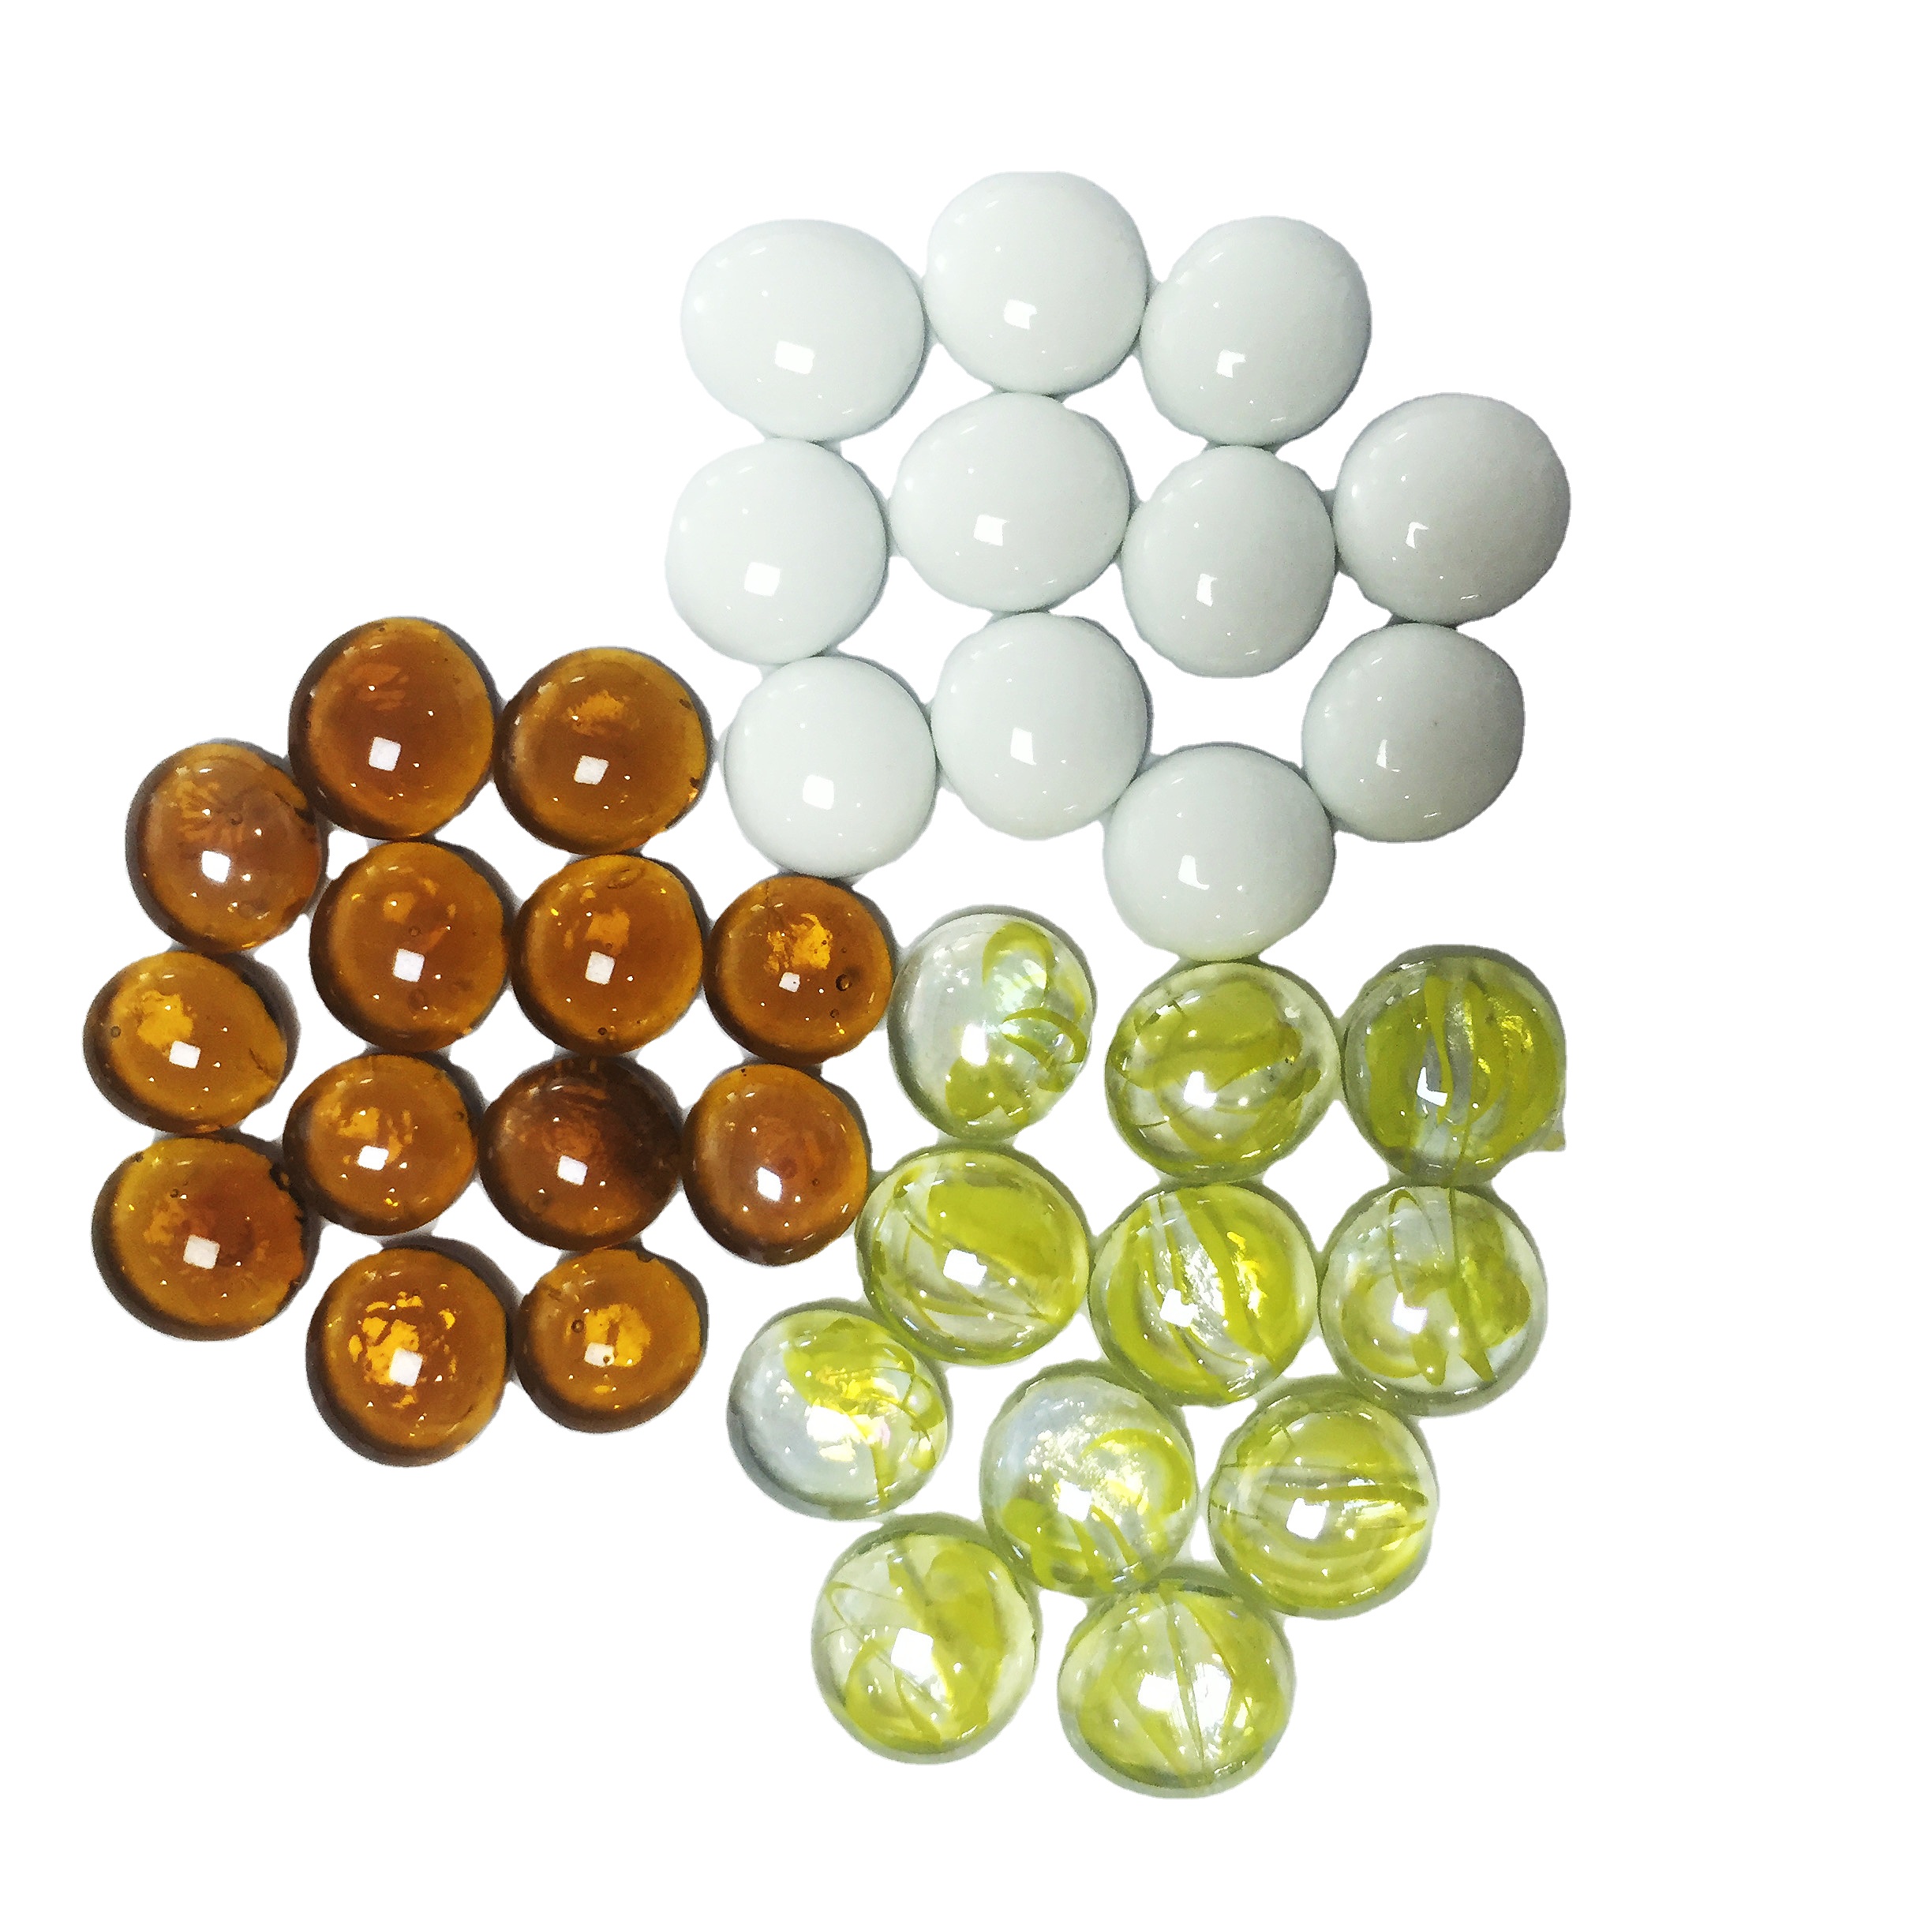 high quality colorful flat frosted glass beads bulk mix value-pack boxed mixed glass beads multi colorful